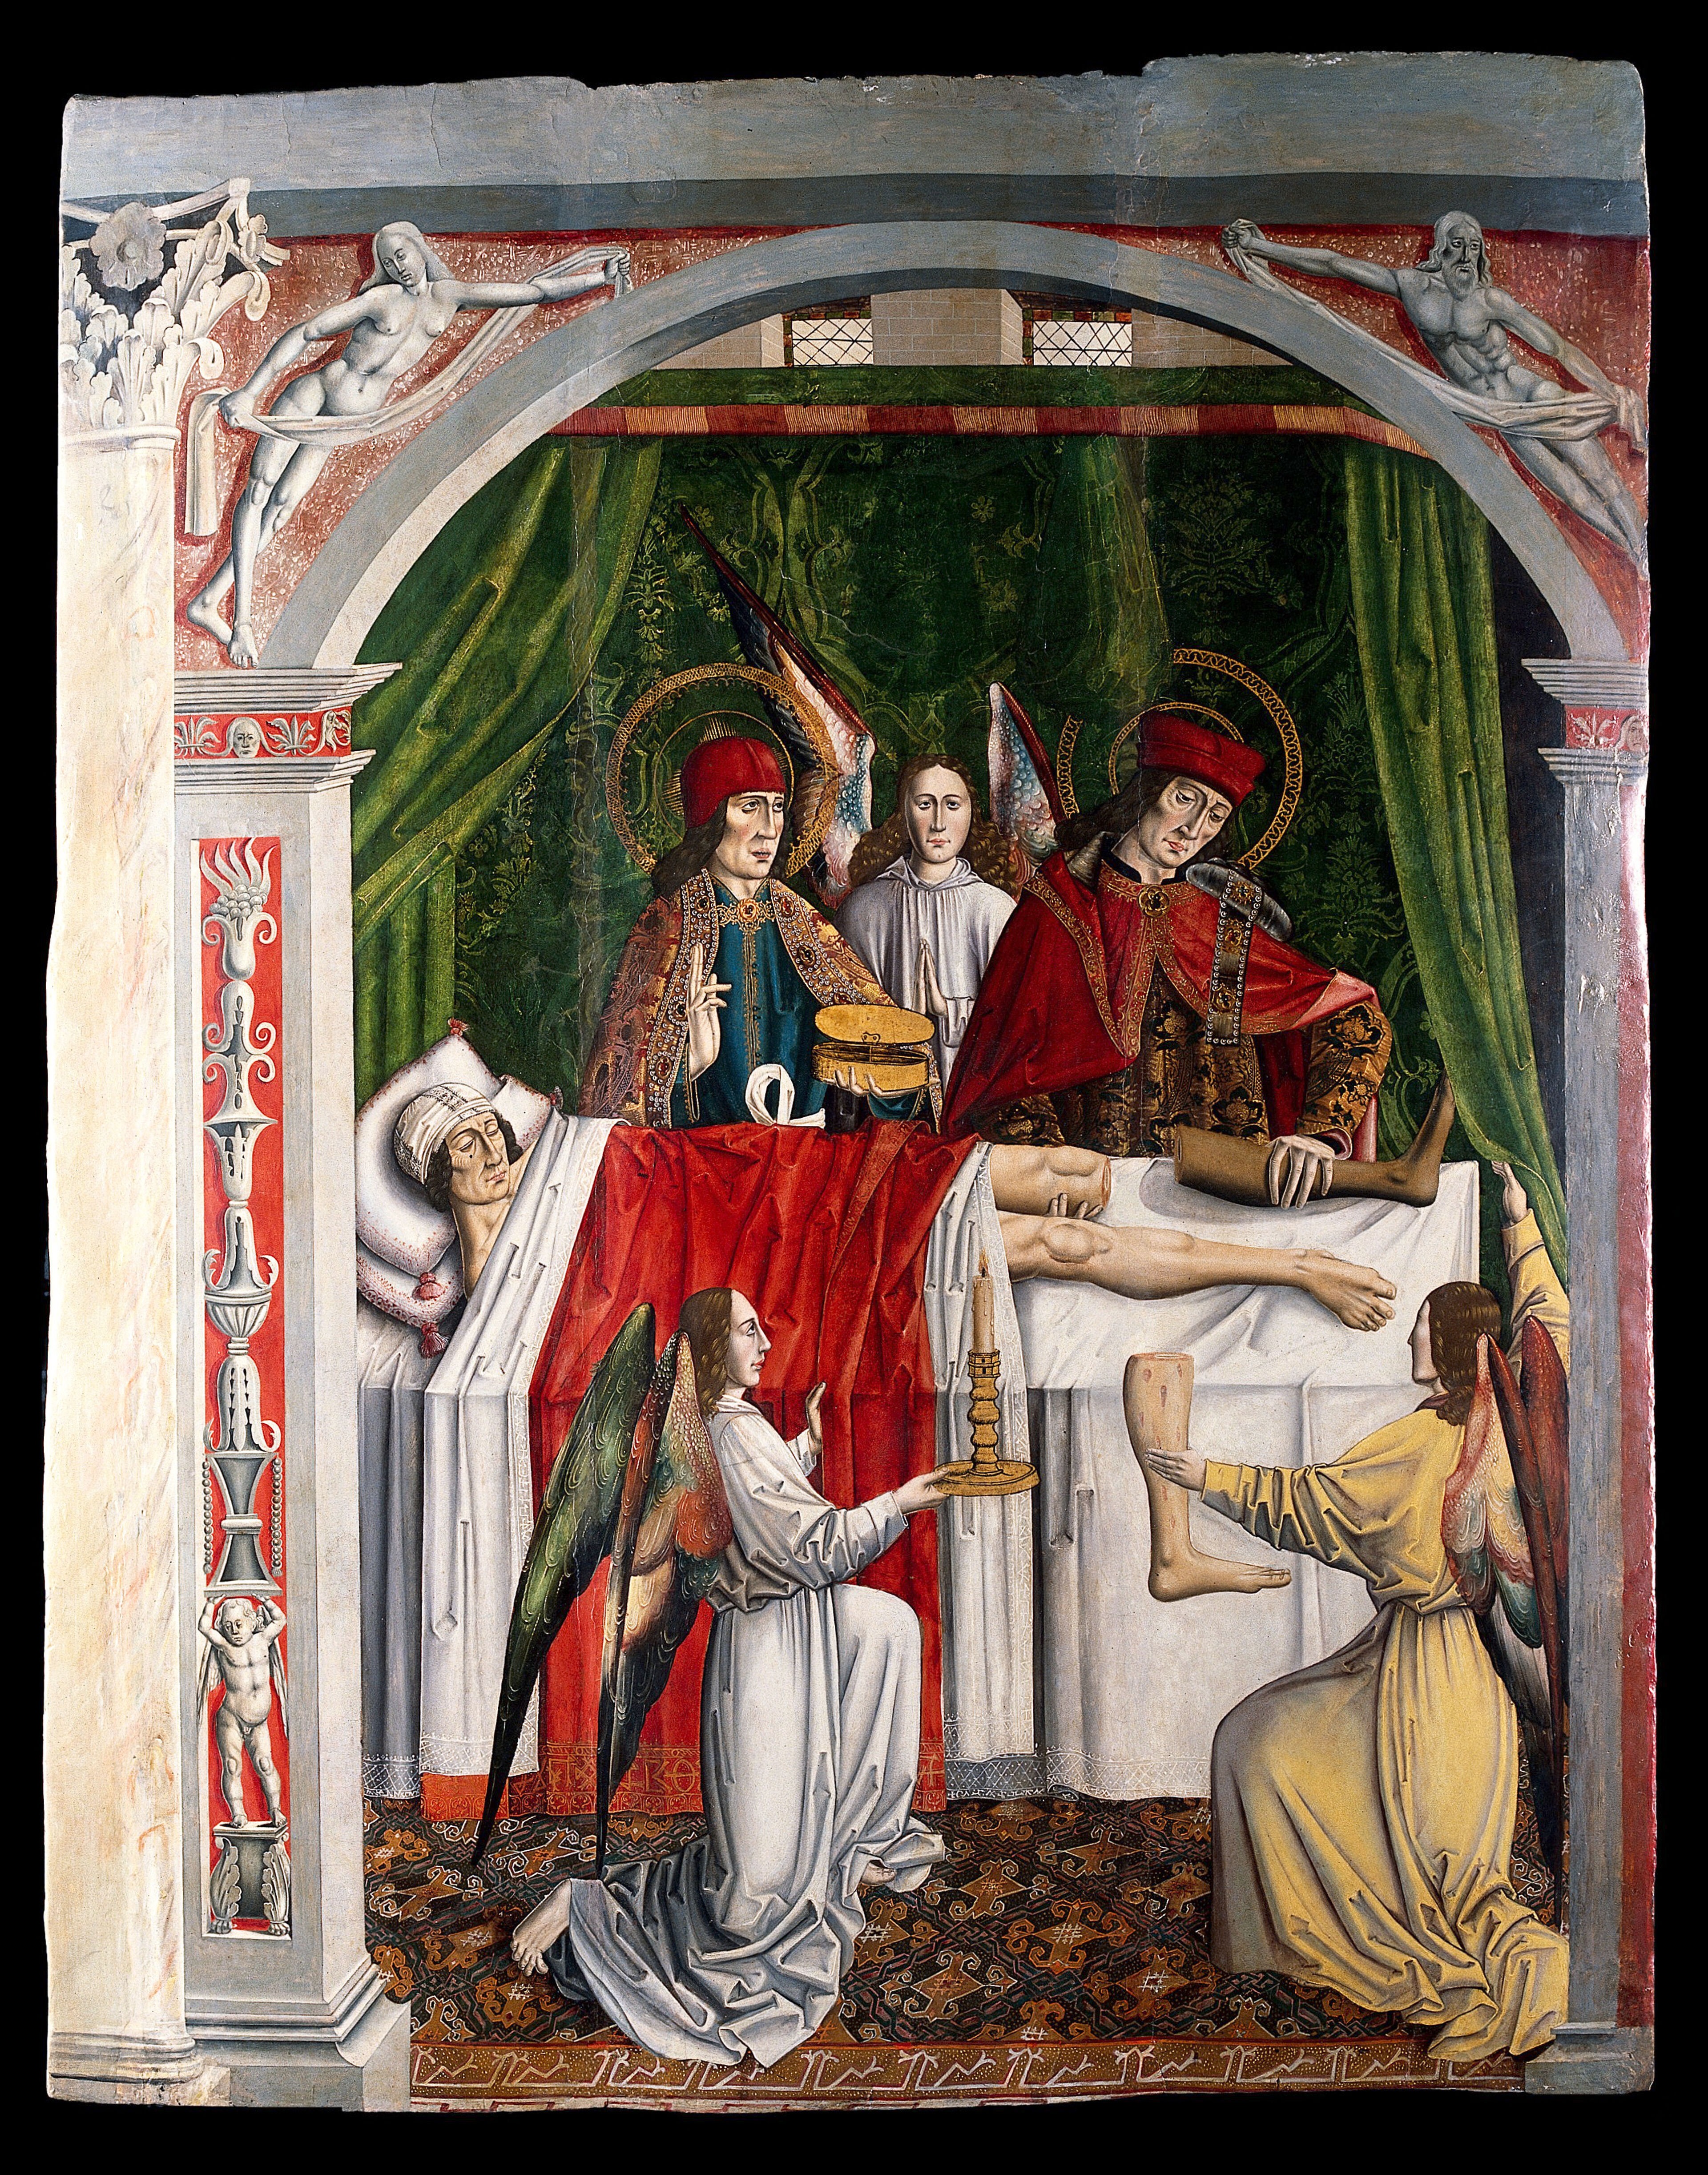 A verger's dream: Saints Cosmas and Damian performing a miraculous cure by transplantation of a leg. Oil painting attributed to the Master of Los Balbases, ca. 1495.